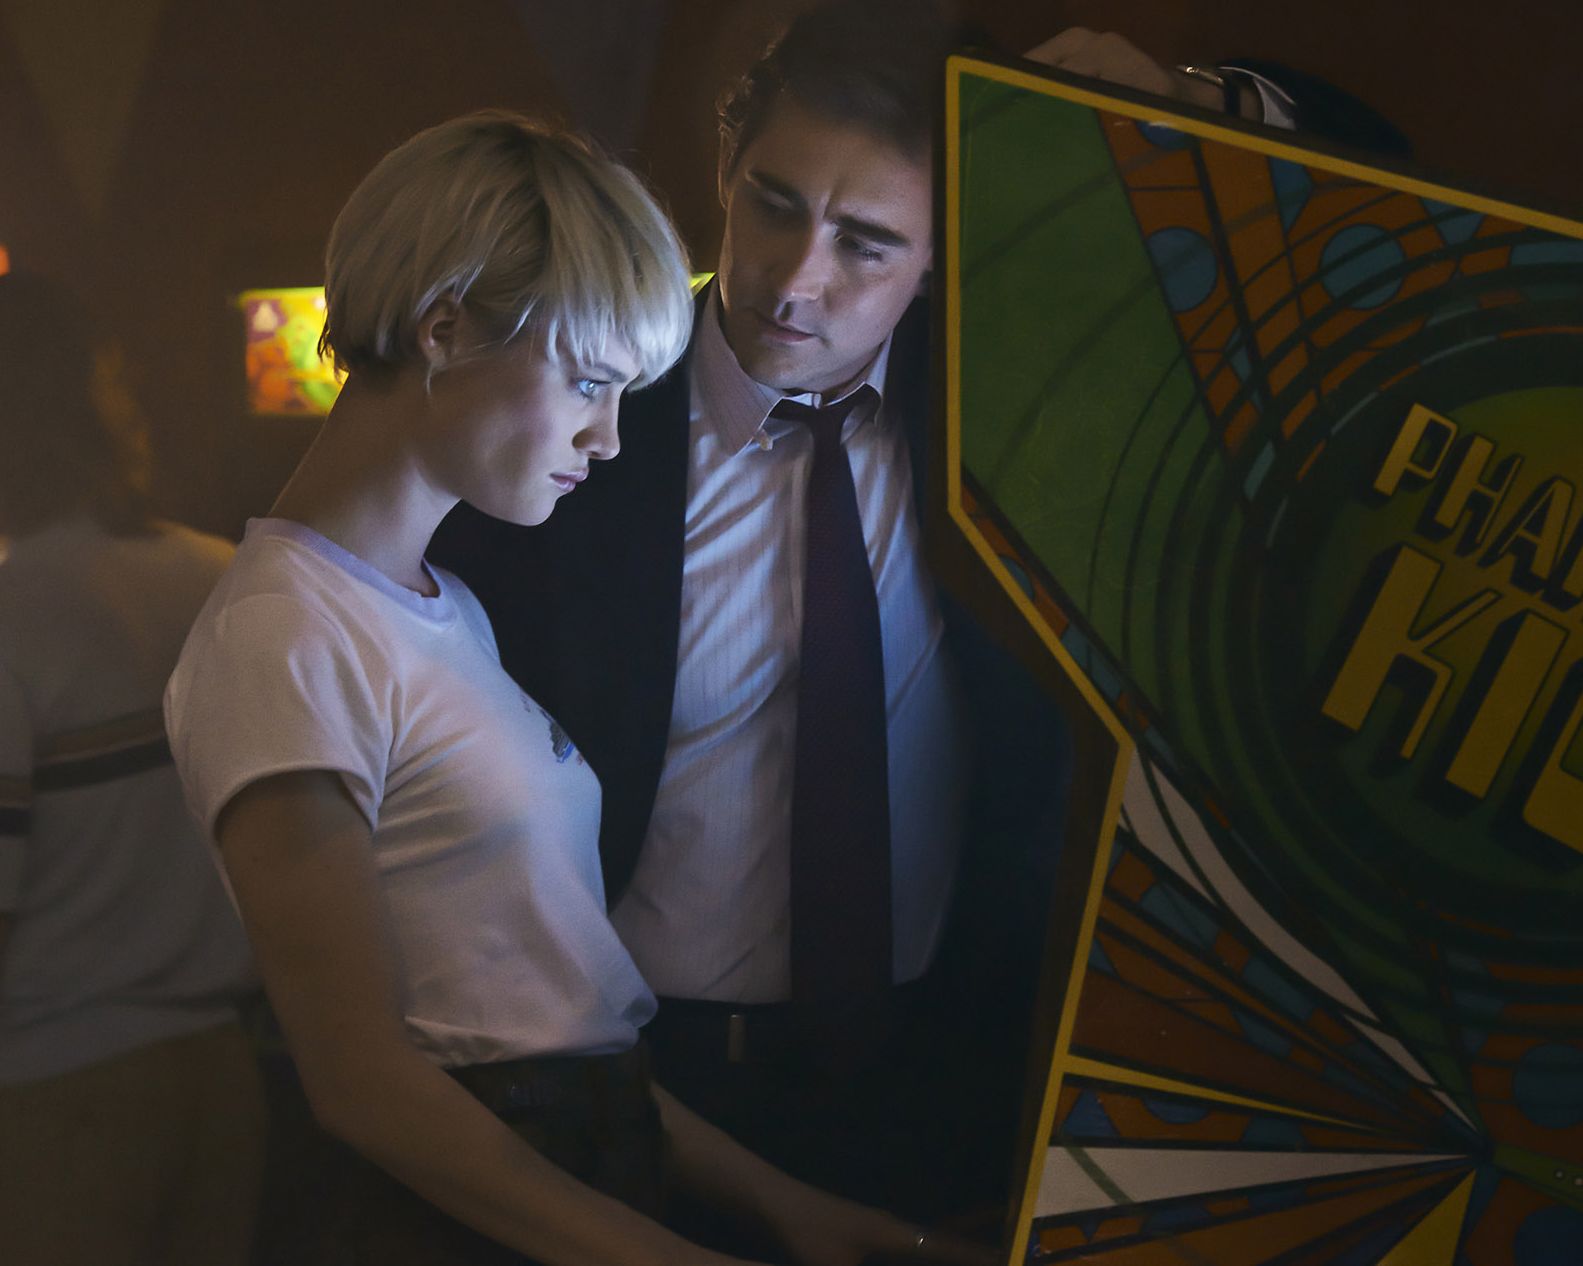 Lee Pace and Mackenzie Davis playing games in Halt and Catch